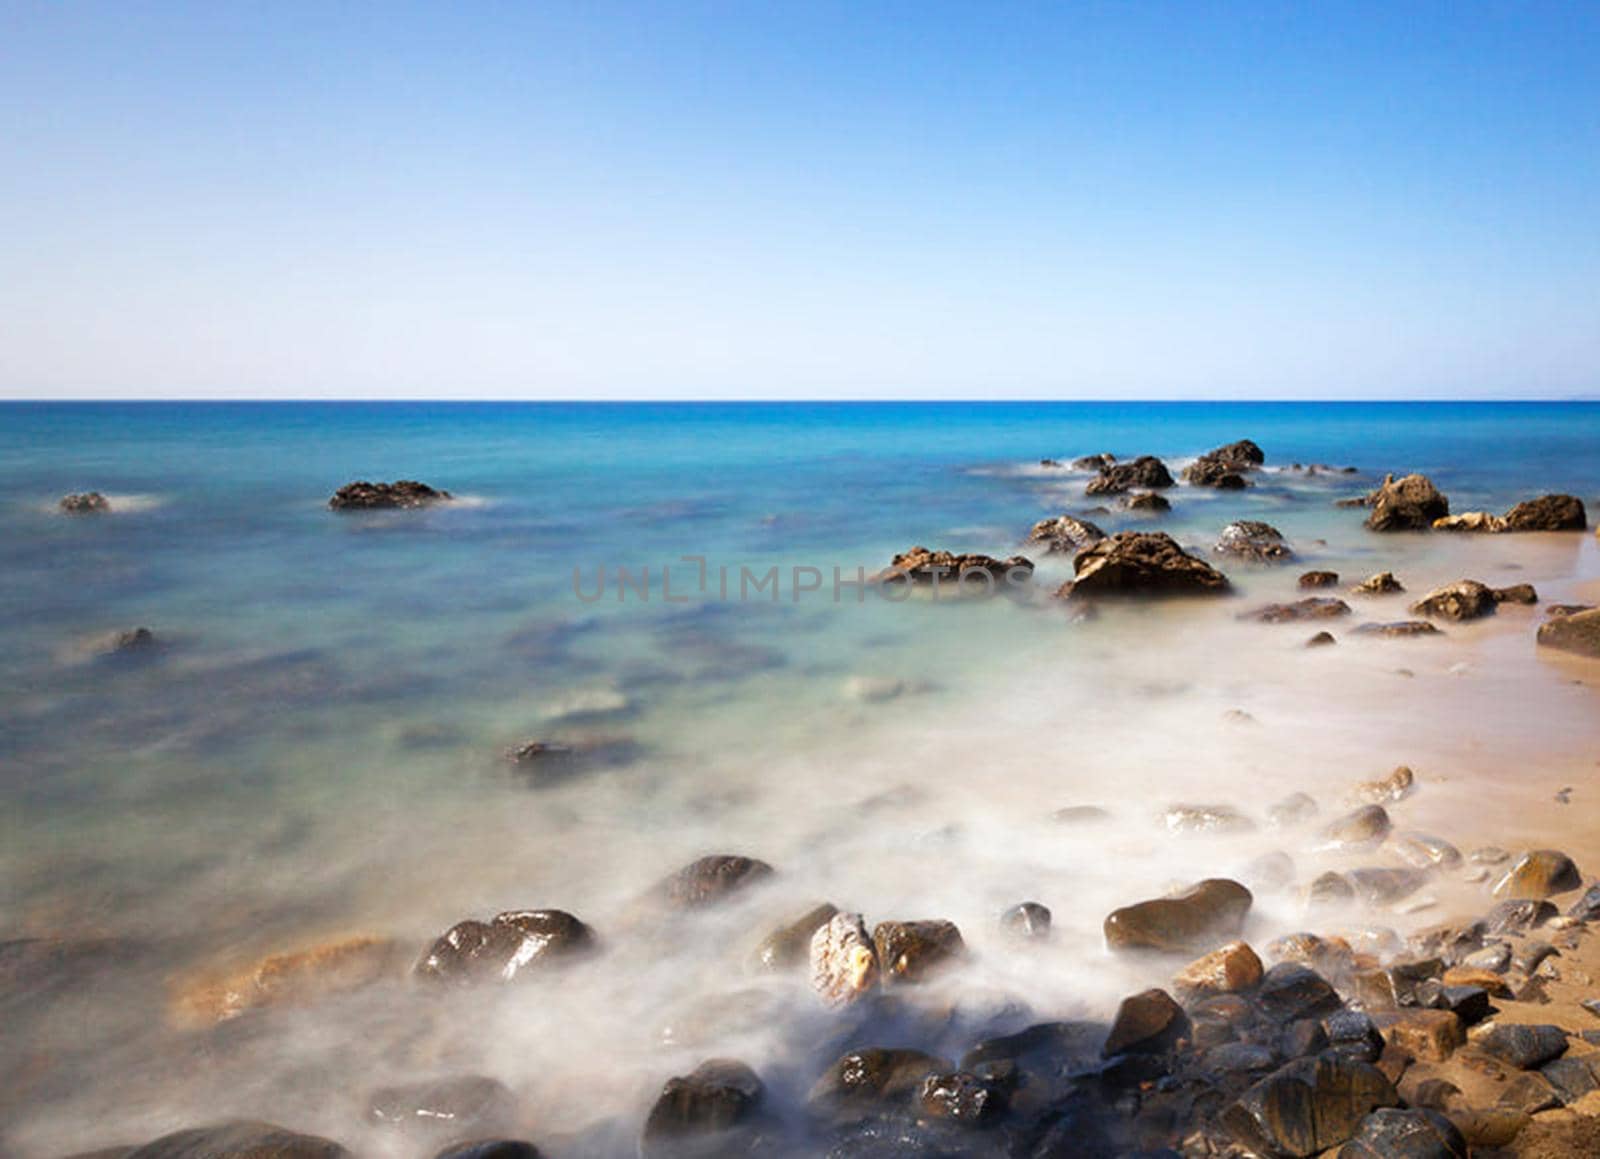 Beautiful pictures of Libya